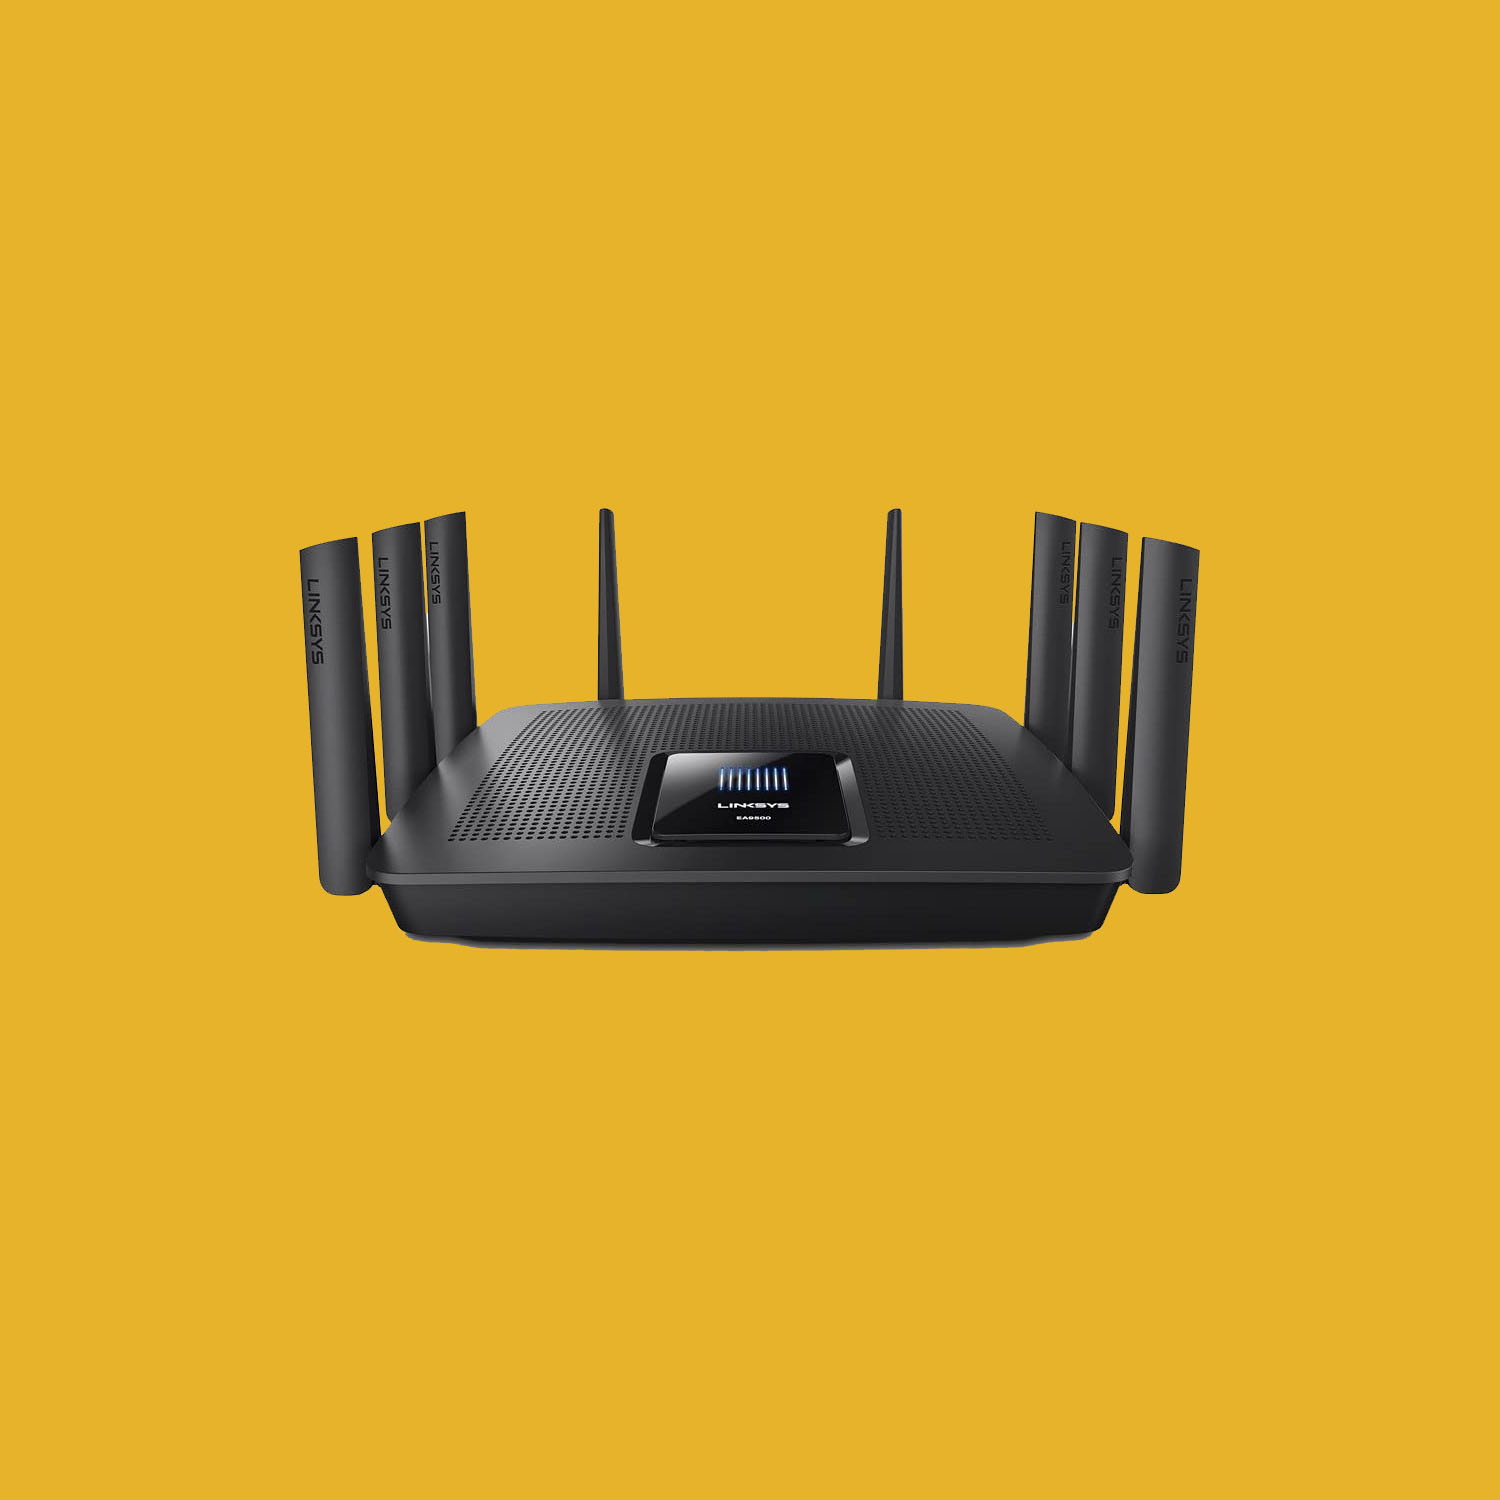 Linksys EA9500 Review